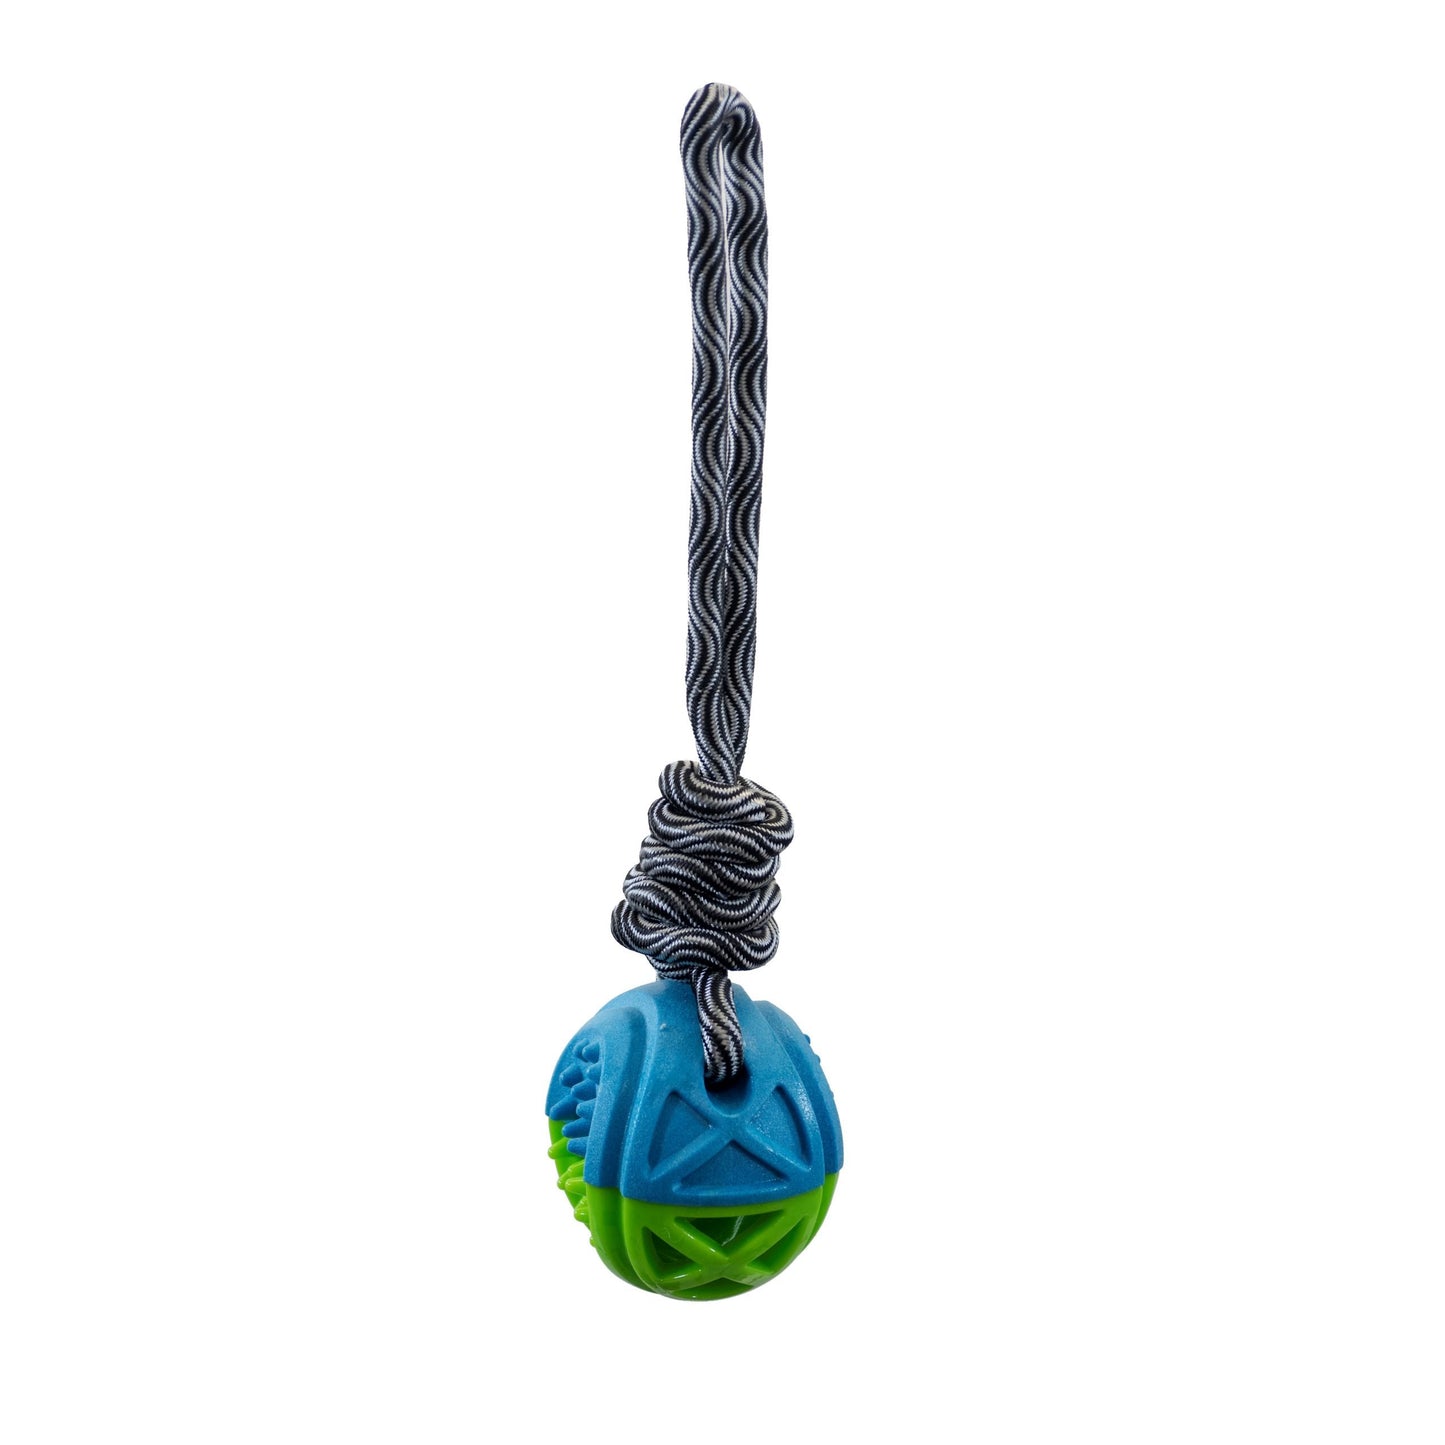 Geo fetch ball tug for dogs